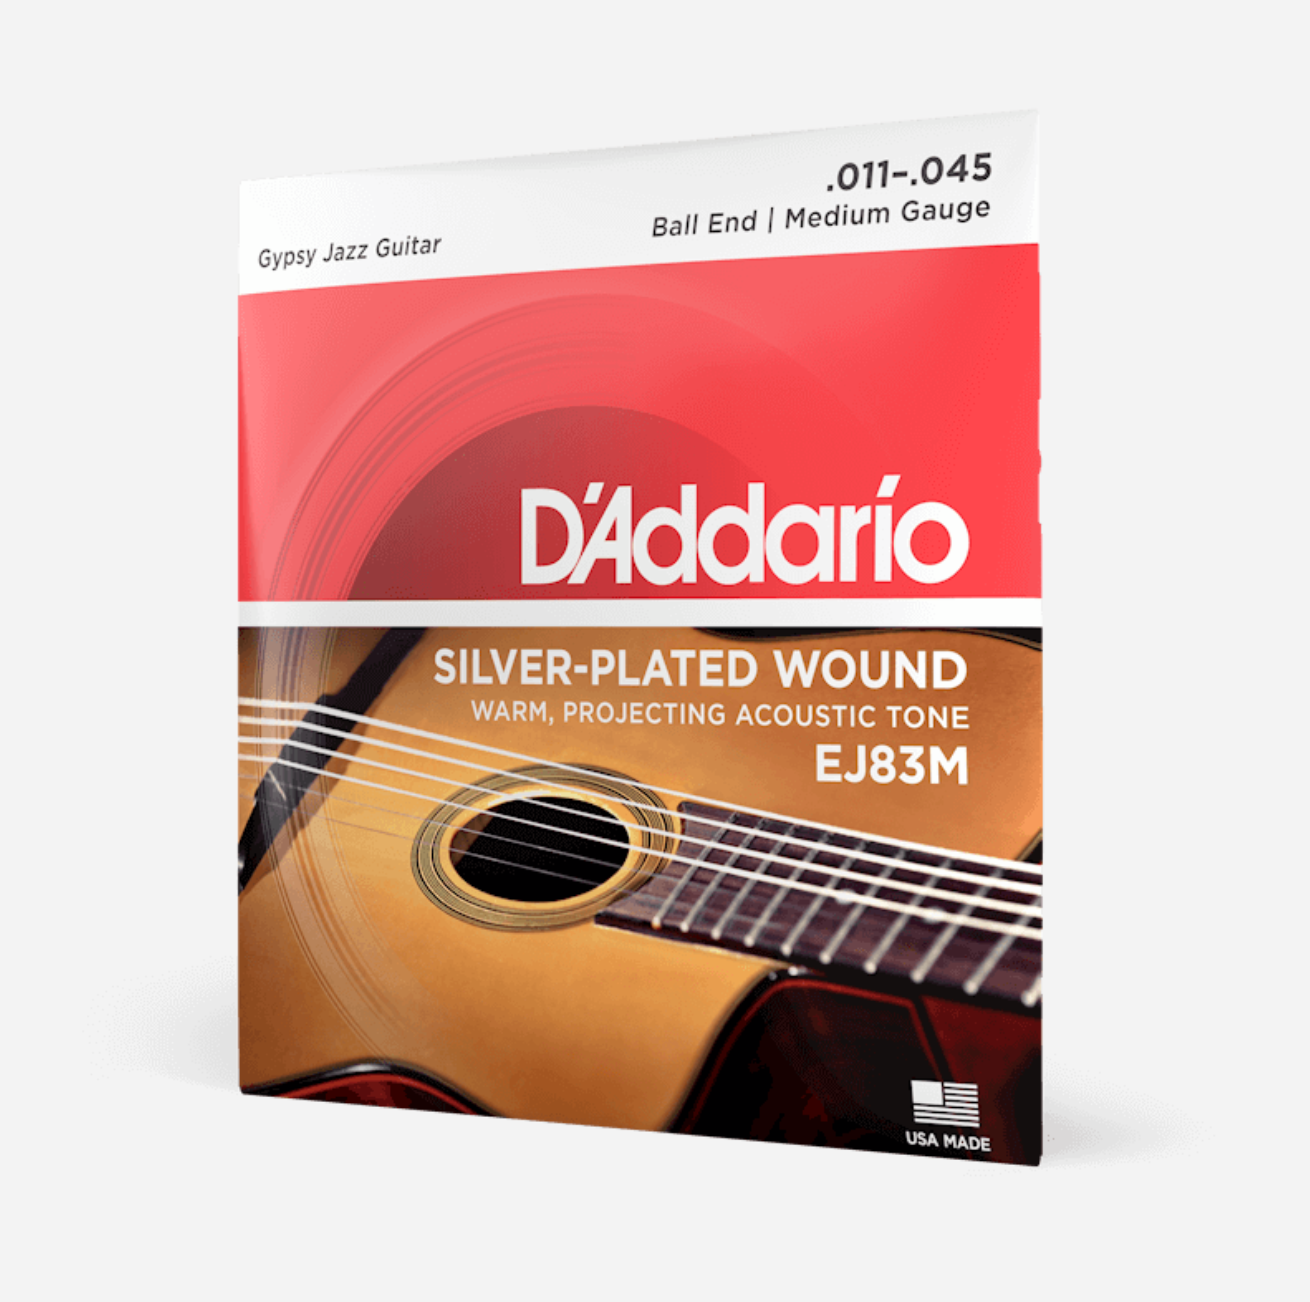 D'Addario Acoustic Guitar Strings - Silver-Plated Wound